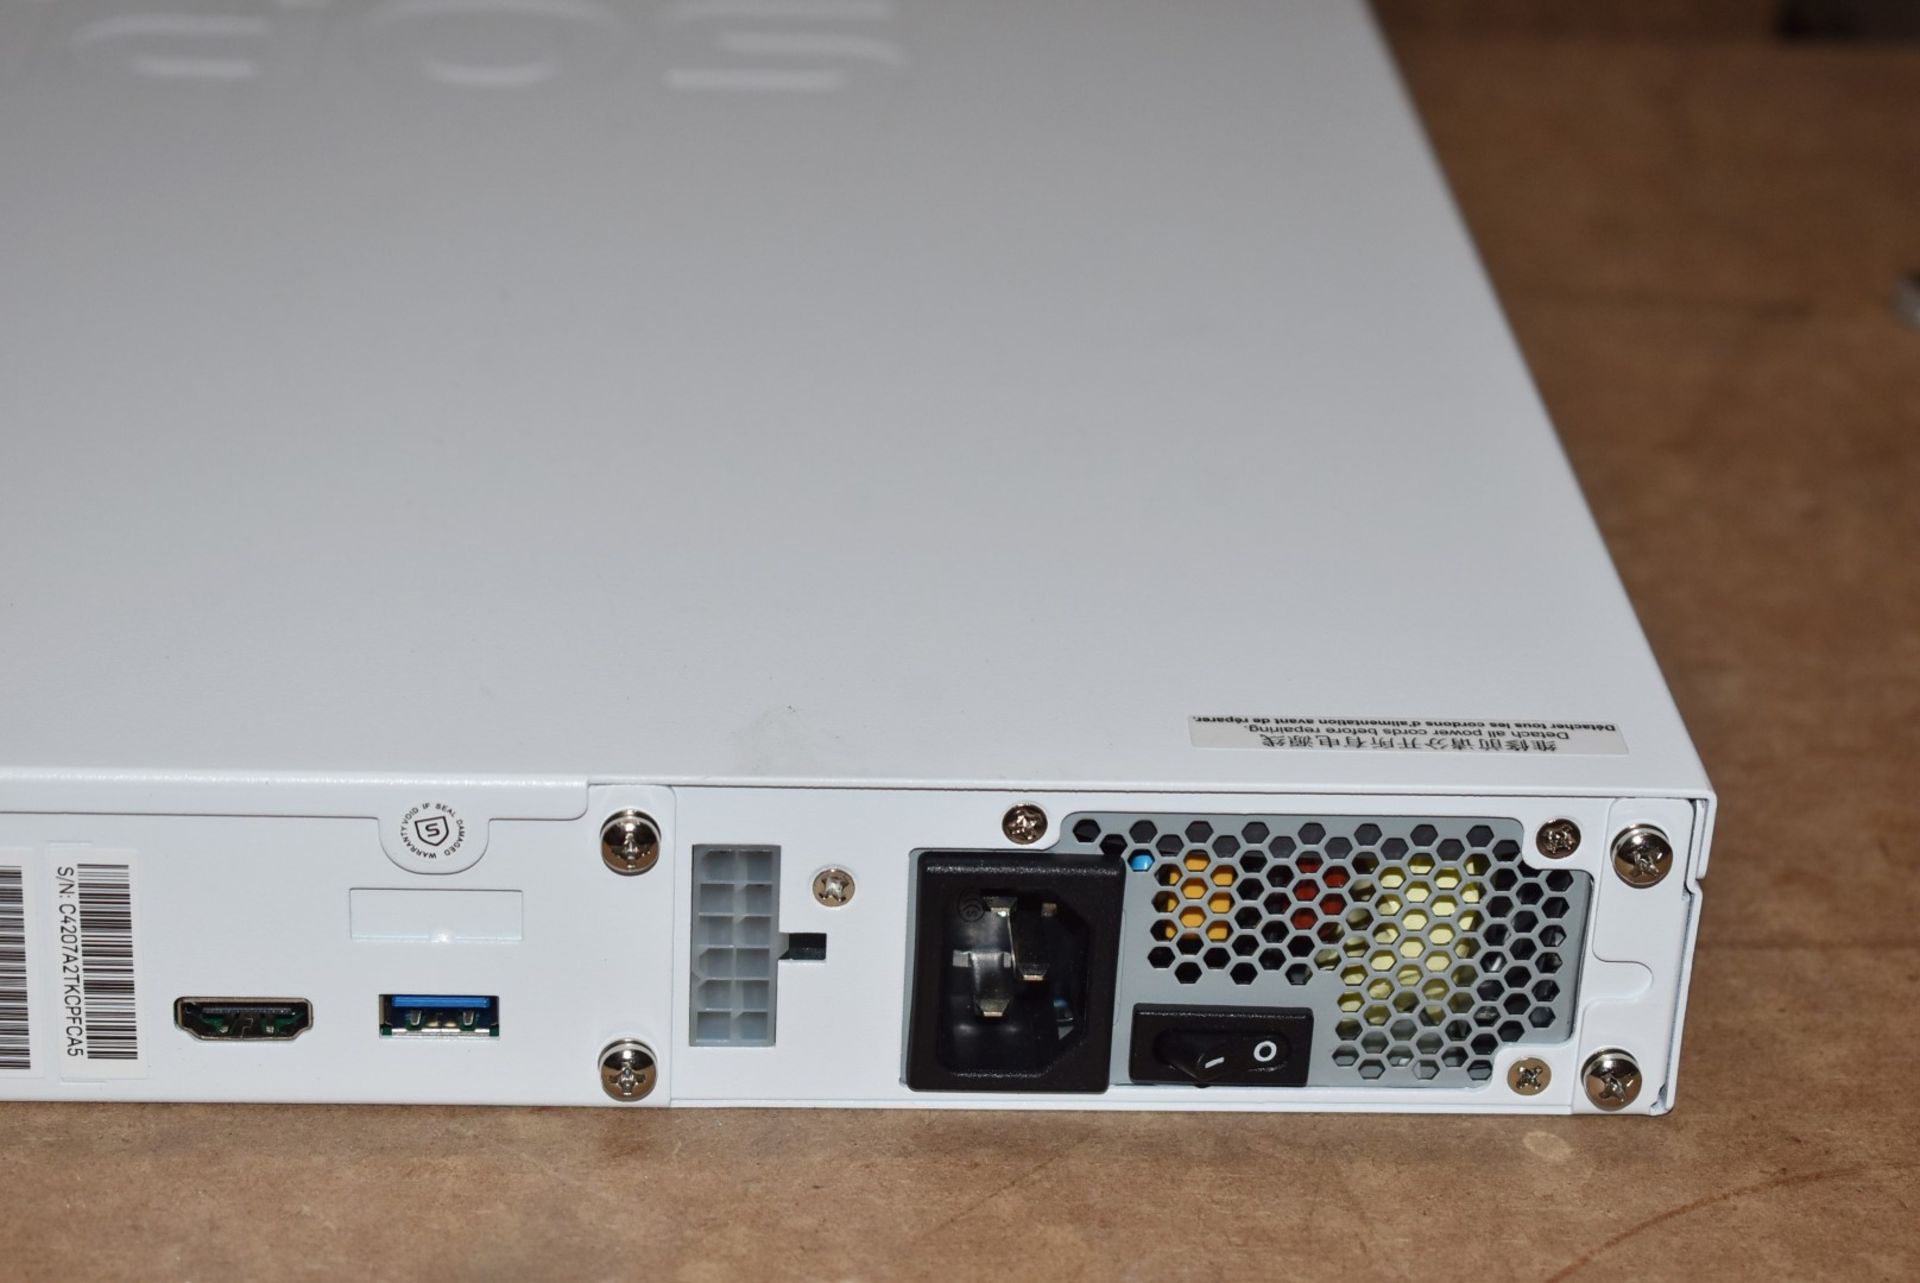 1 x Sophos XG430 Edge Firewall Appliance - Rev2 - Manufactured Jan 2019 - Includes Power Cable - - Image 2 of 11